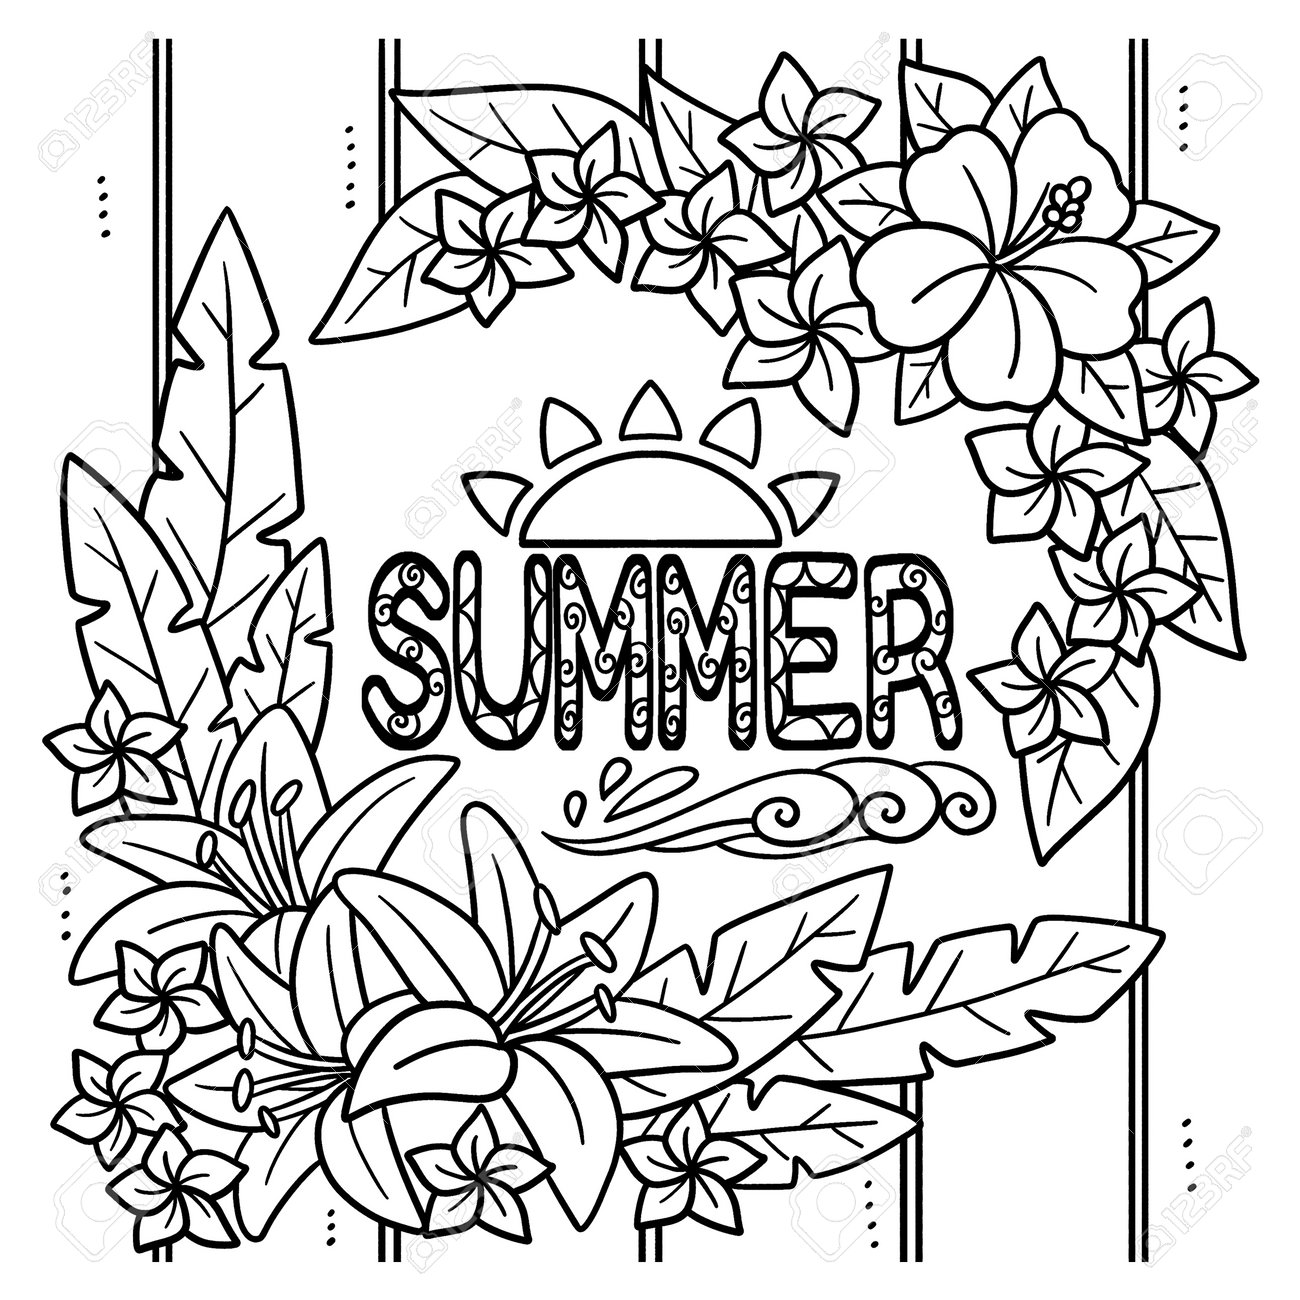 Summer with flower coloring page for kids royalty free svg cliparts vectors and stock illustration image